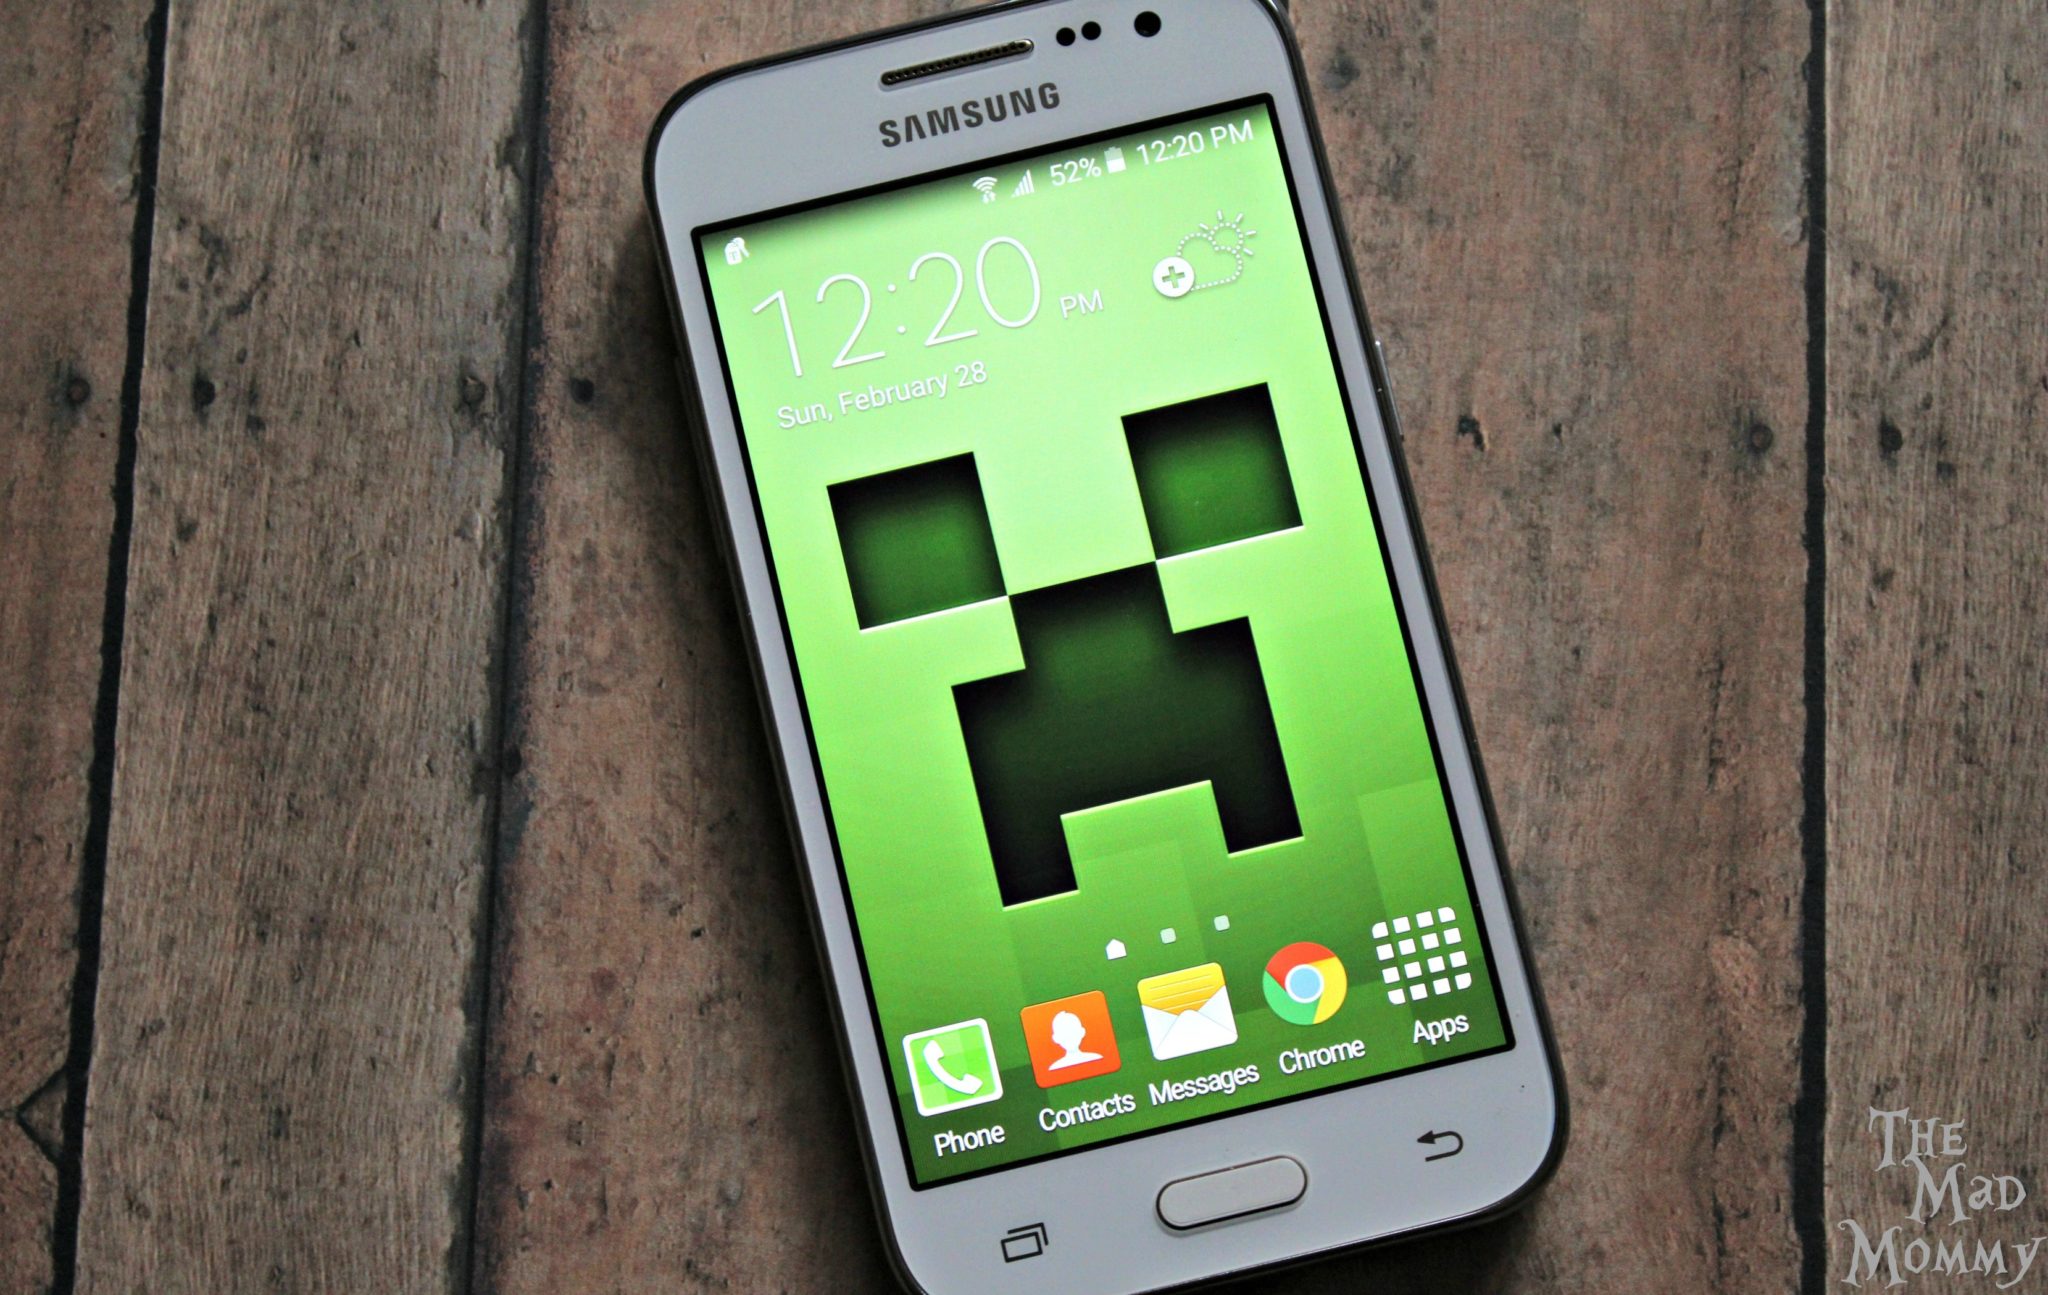 samsung galaxy core prime wallpaper,gadget,mobile phone,smartphone,portable communications device,electronic device